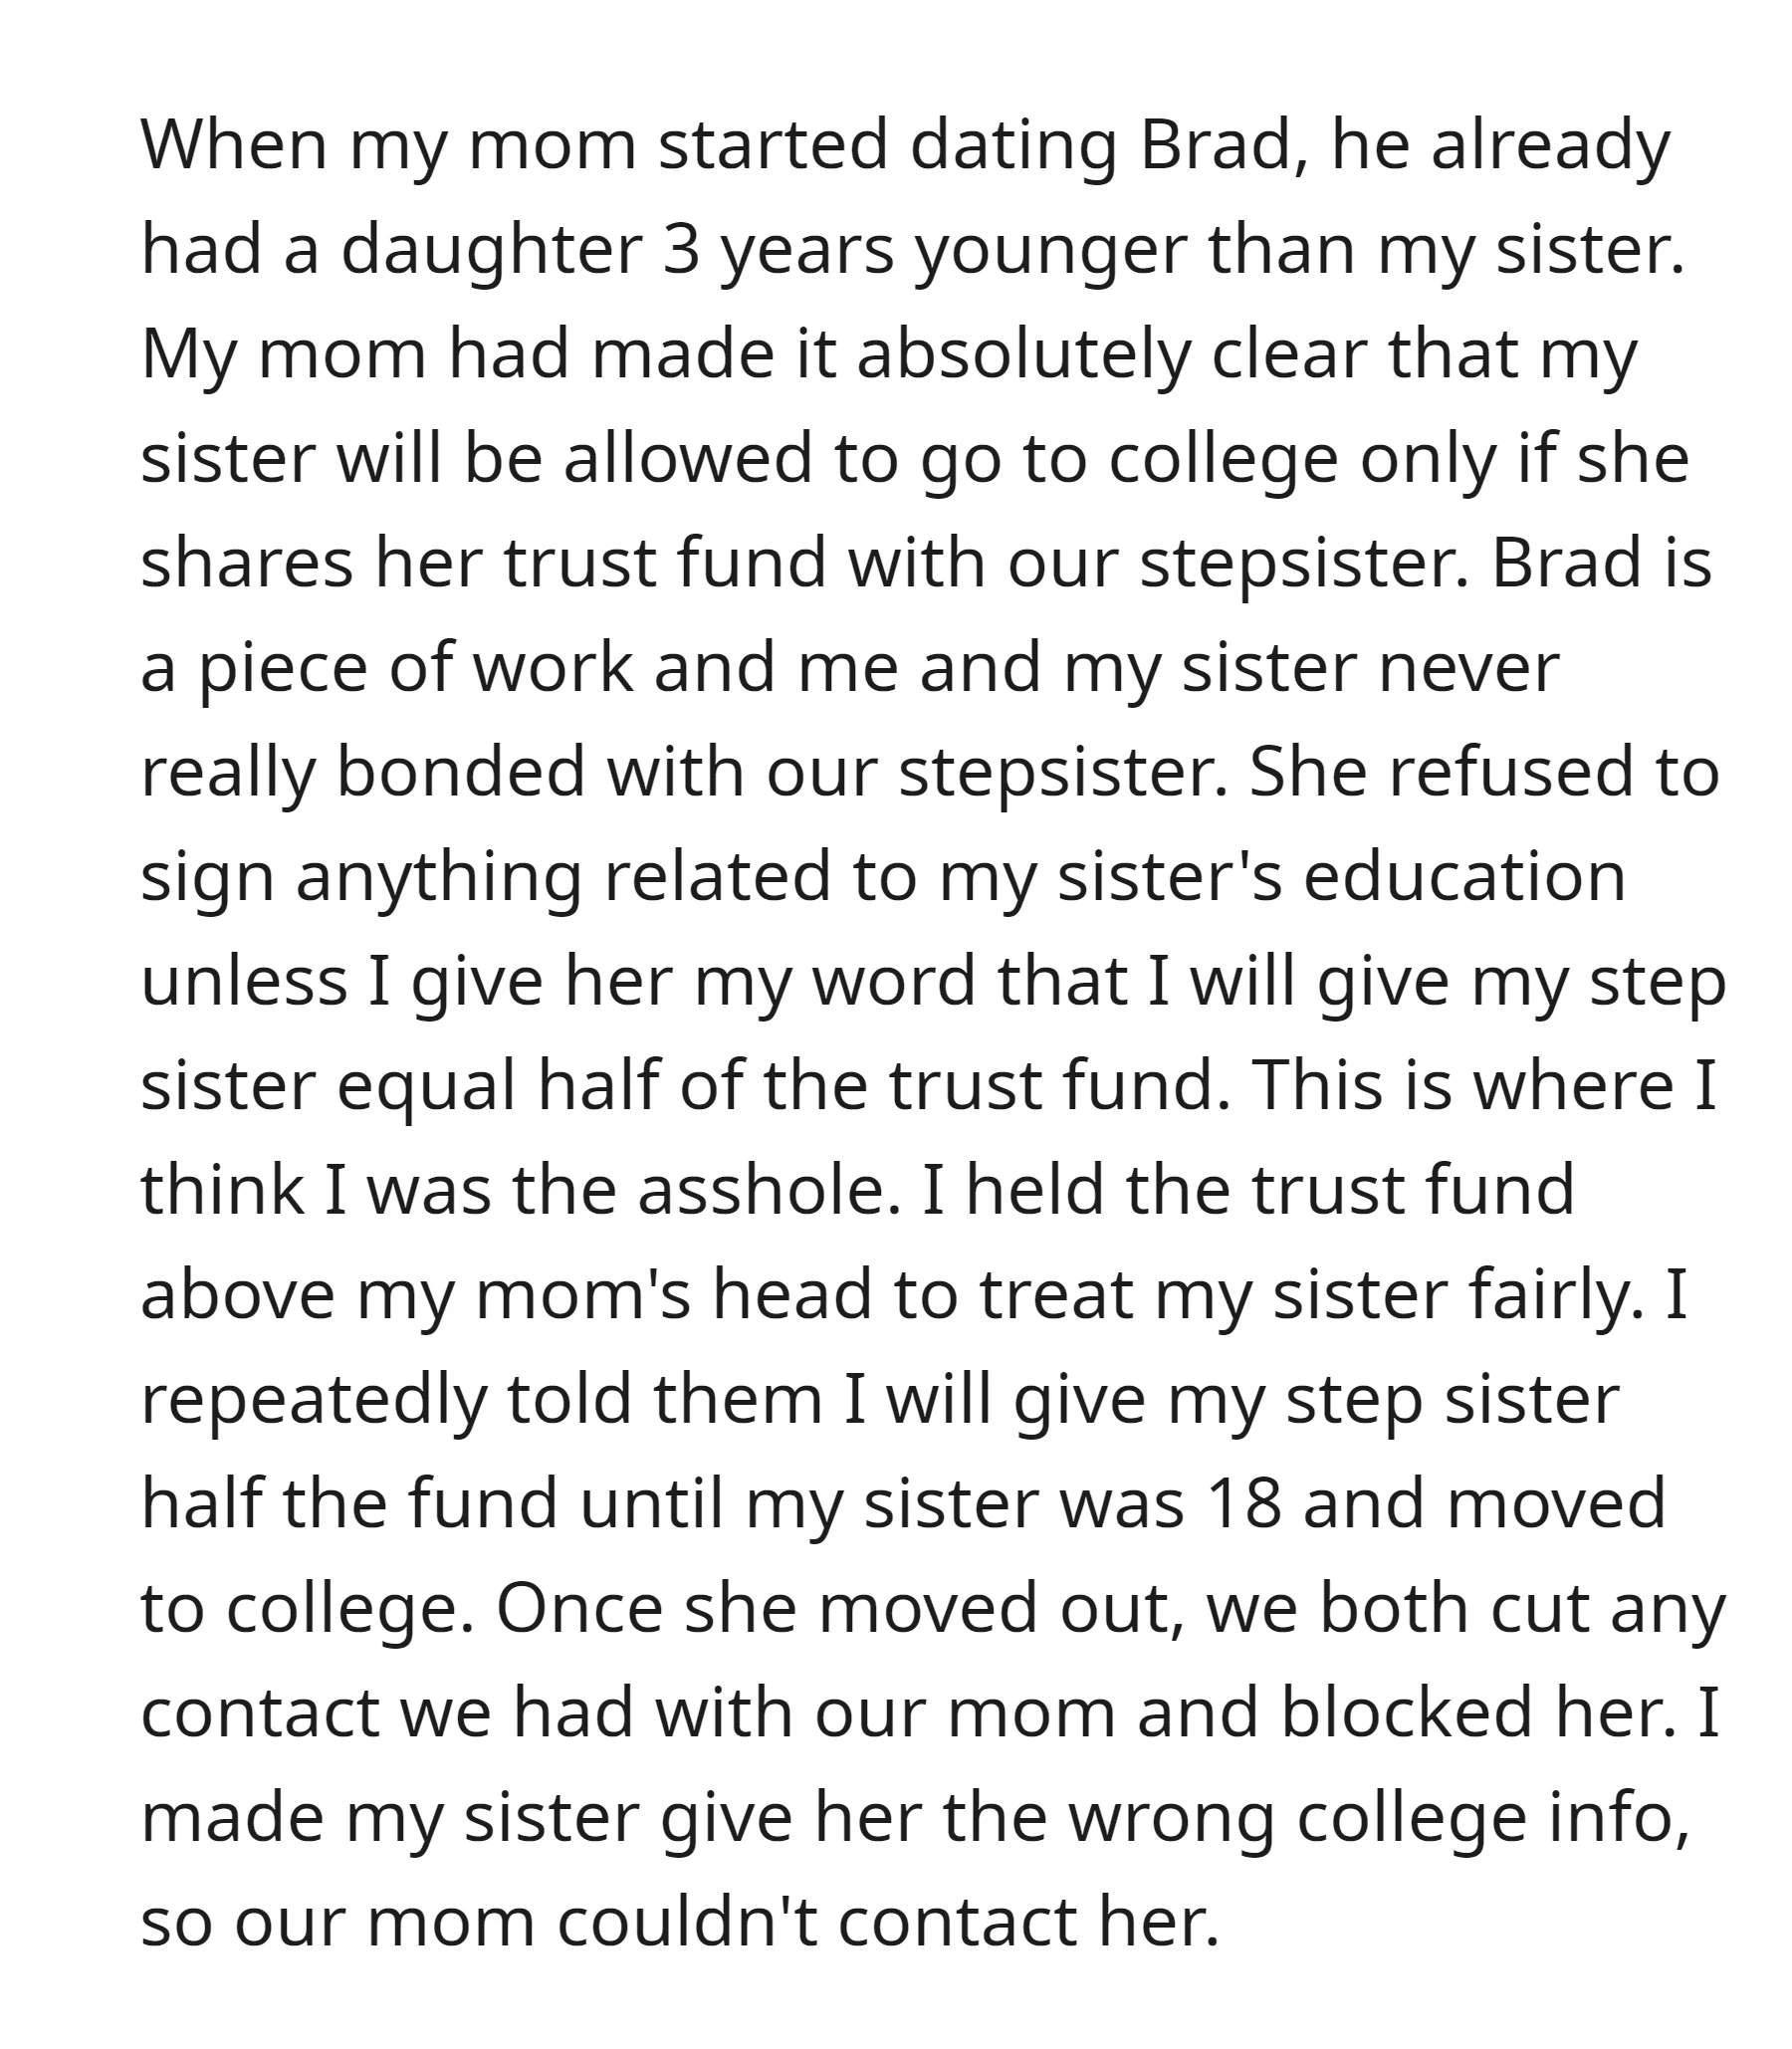 The mom won't allow OP's sister to go to college only if she share her trust find with her stepsister